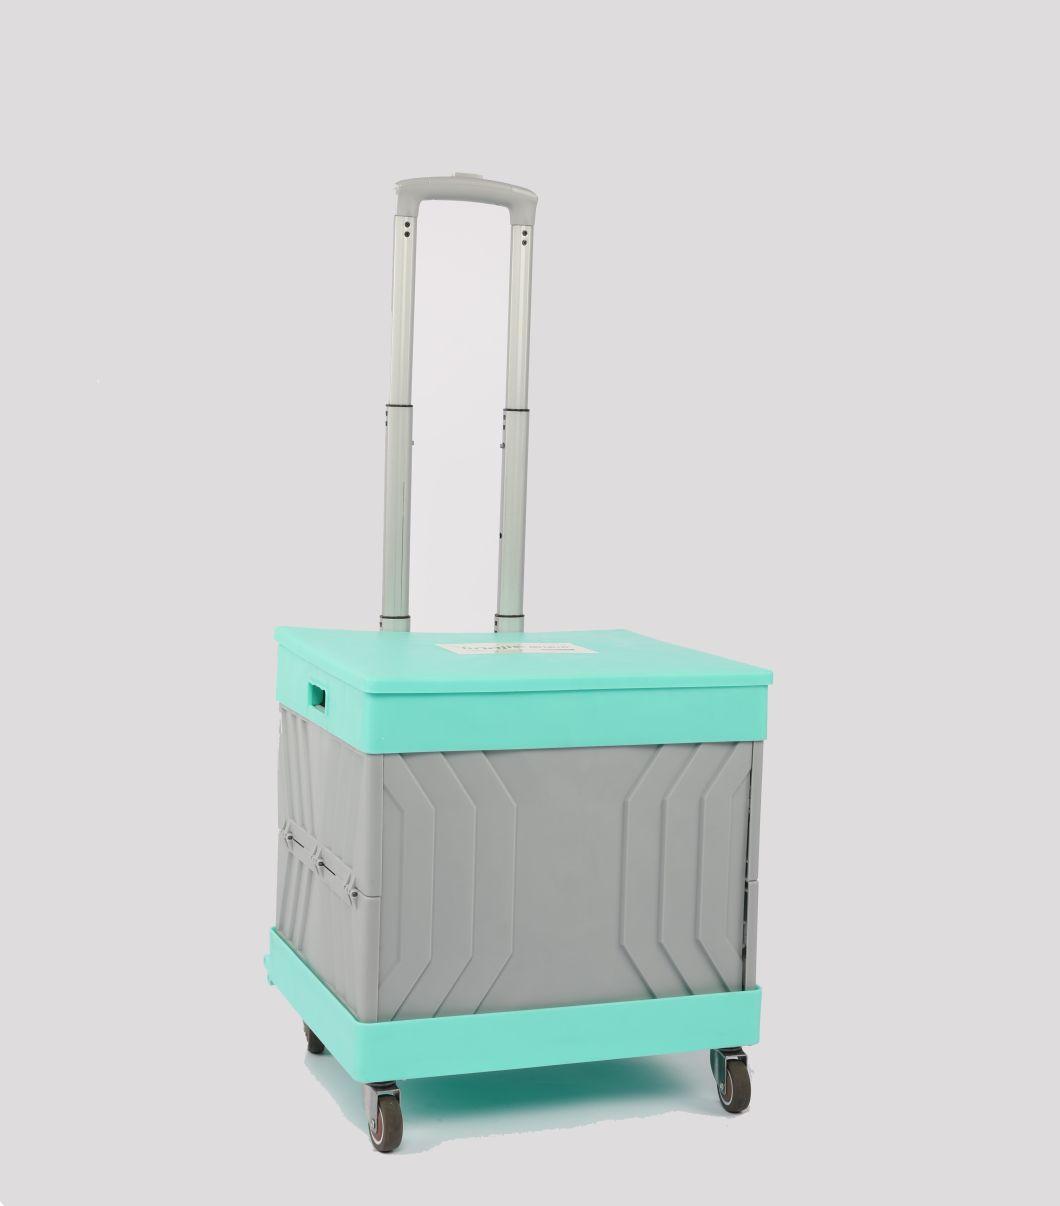 China New Design Portable Folding Plastic Box Shopping Trolley with Four Universal Wheels